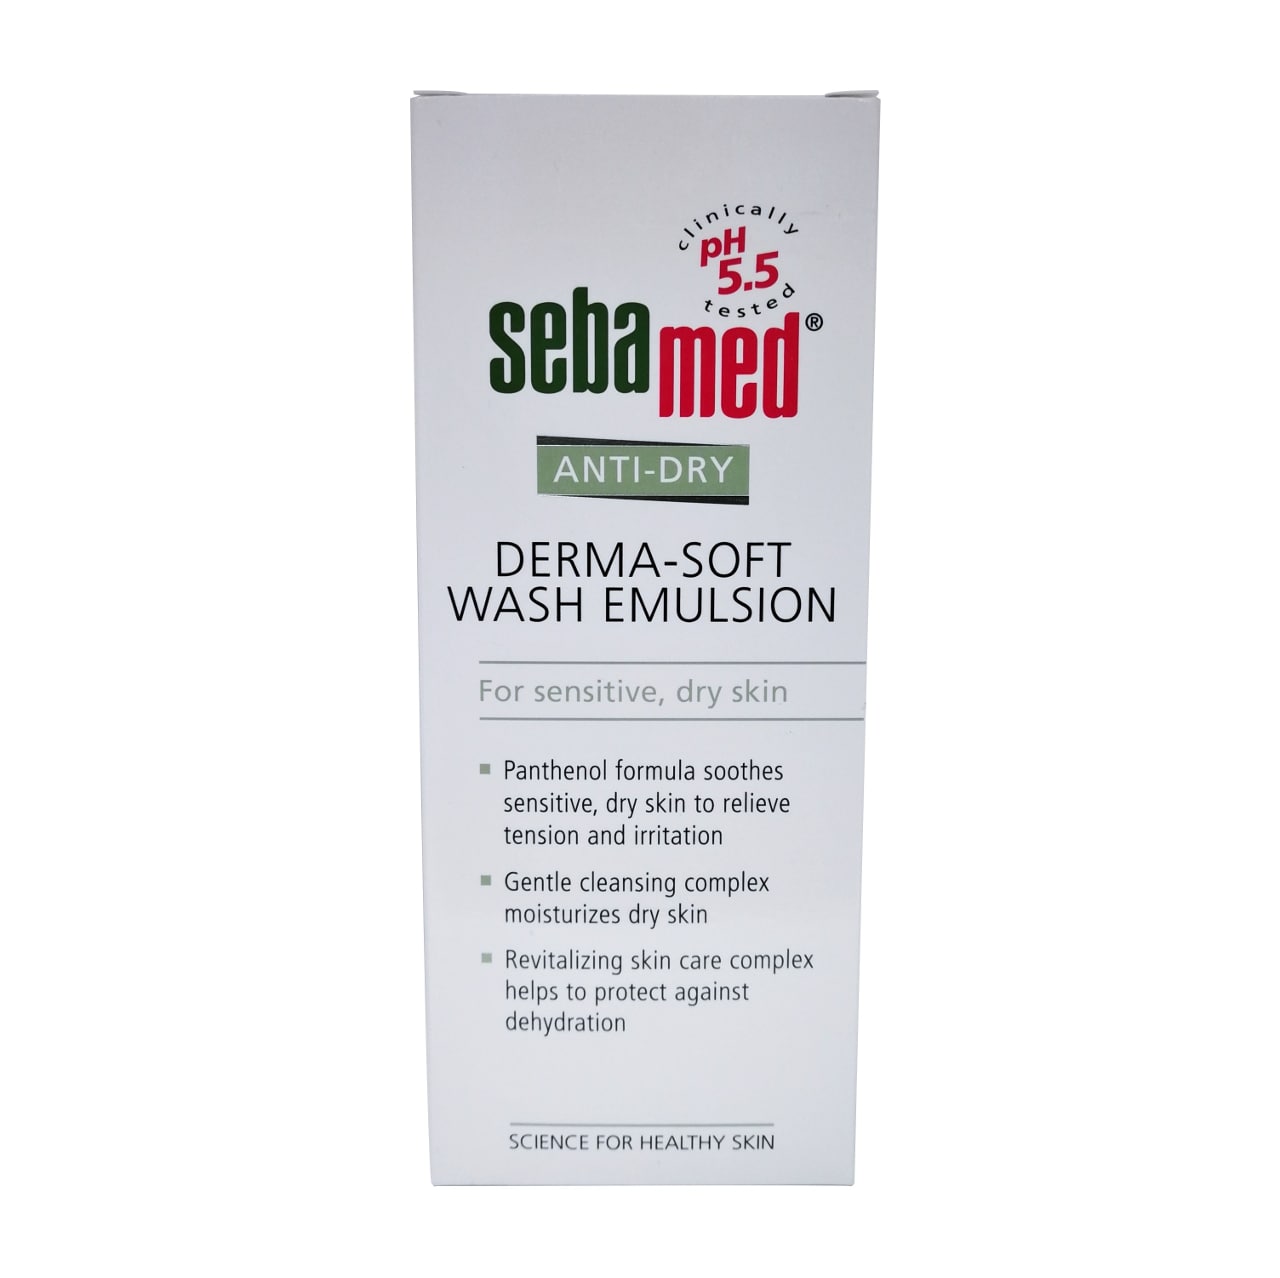 Product label for Sebamed Anti-Dry Derma-Soft Wash Emulsion in English